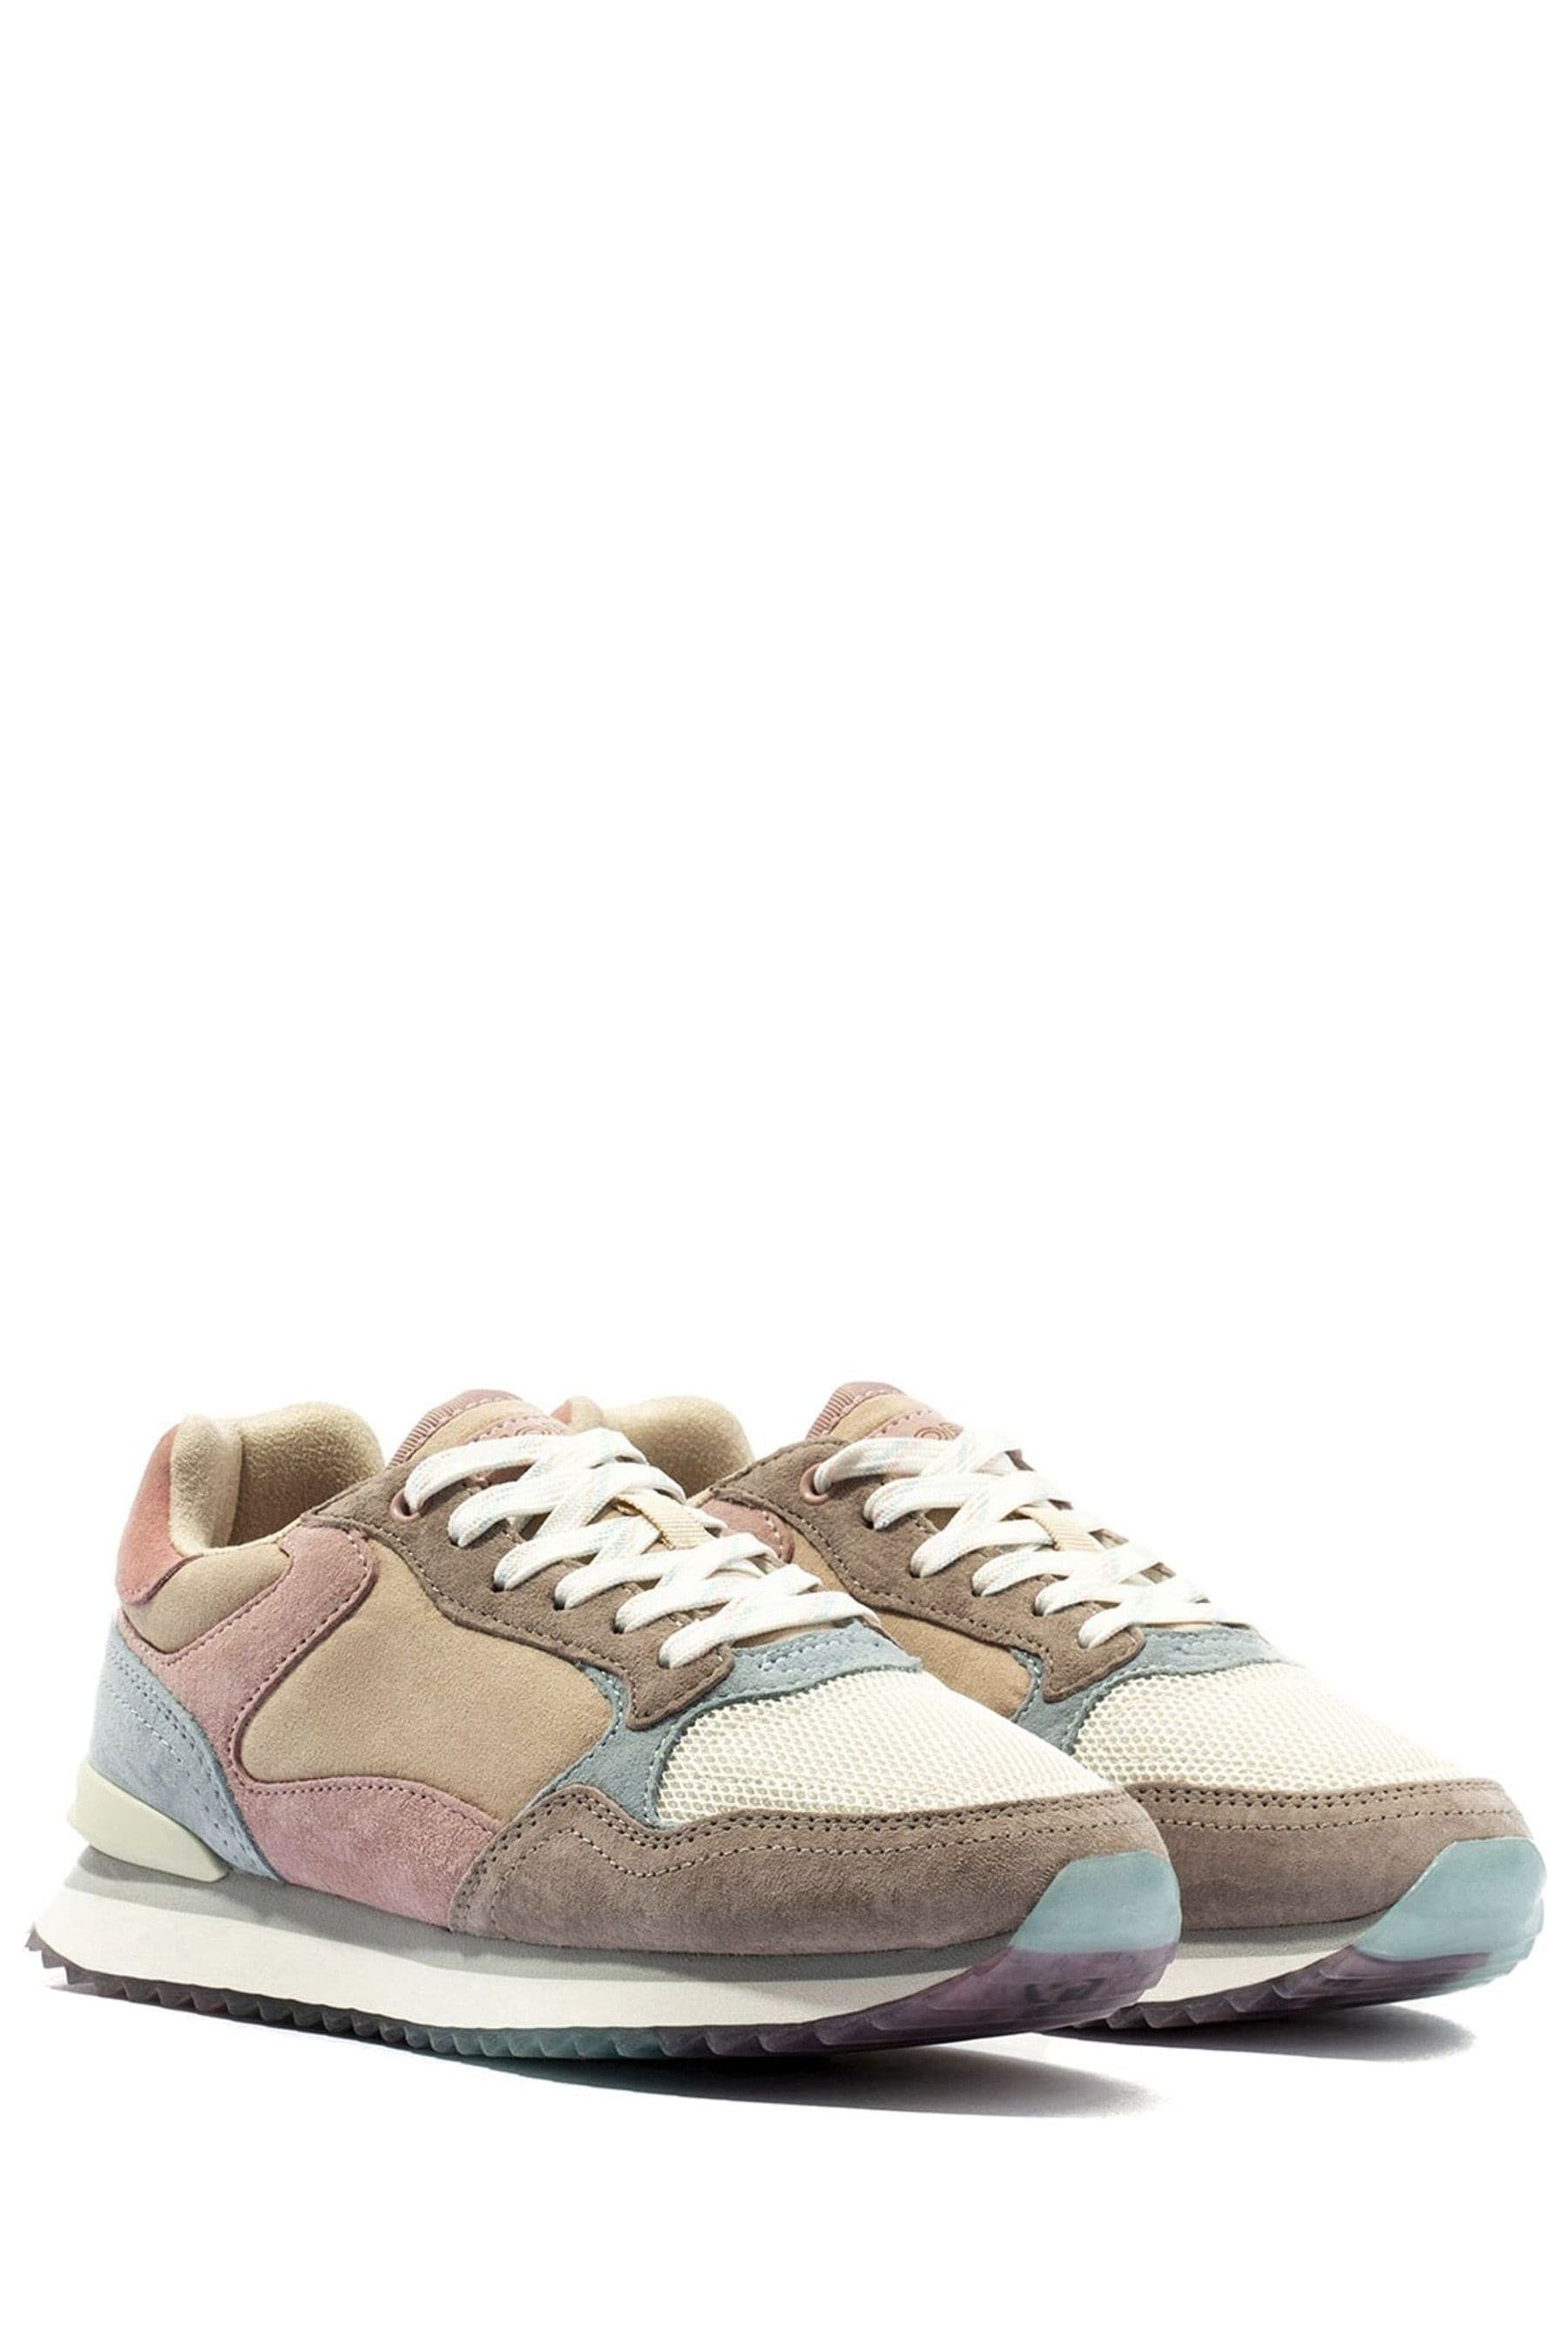 Buy HOFF Barcelona Nude/Blue Suede Trainers from the Next UK online shop